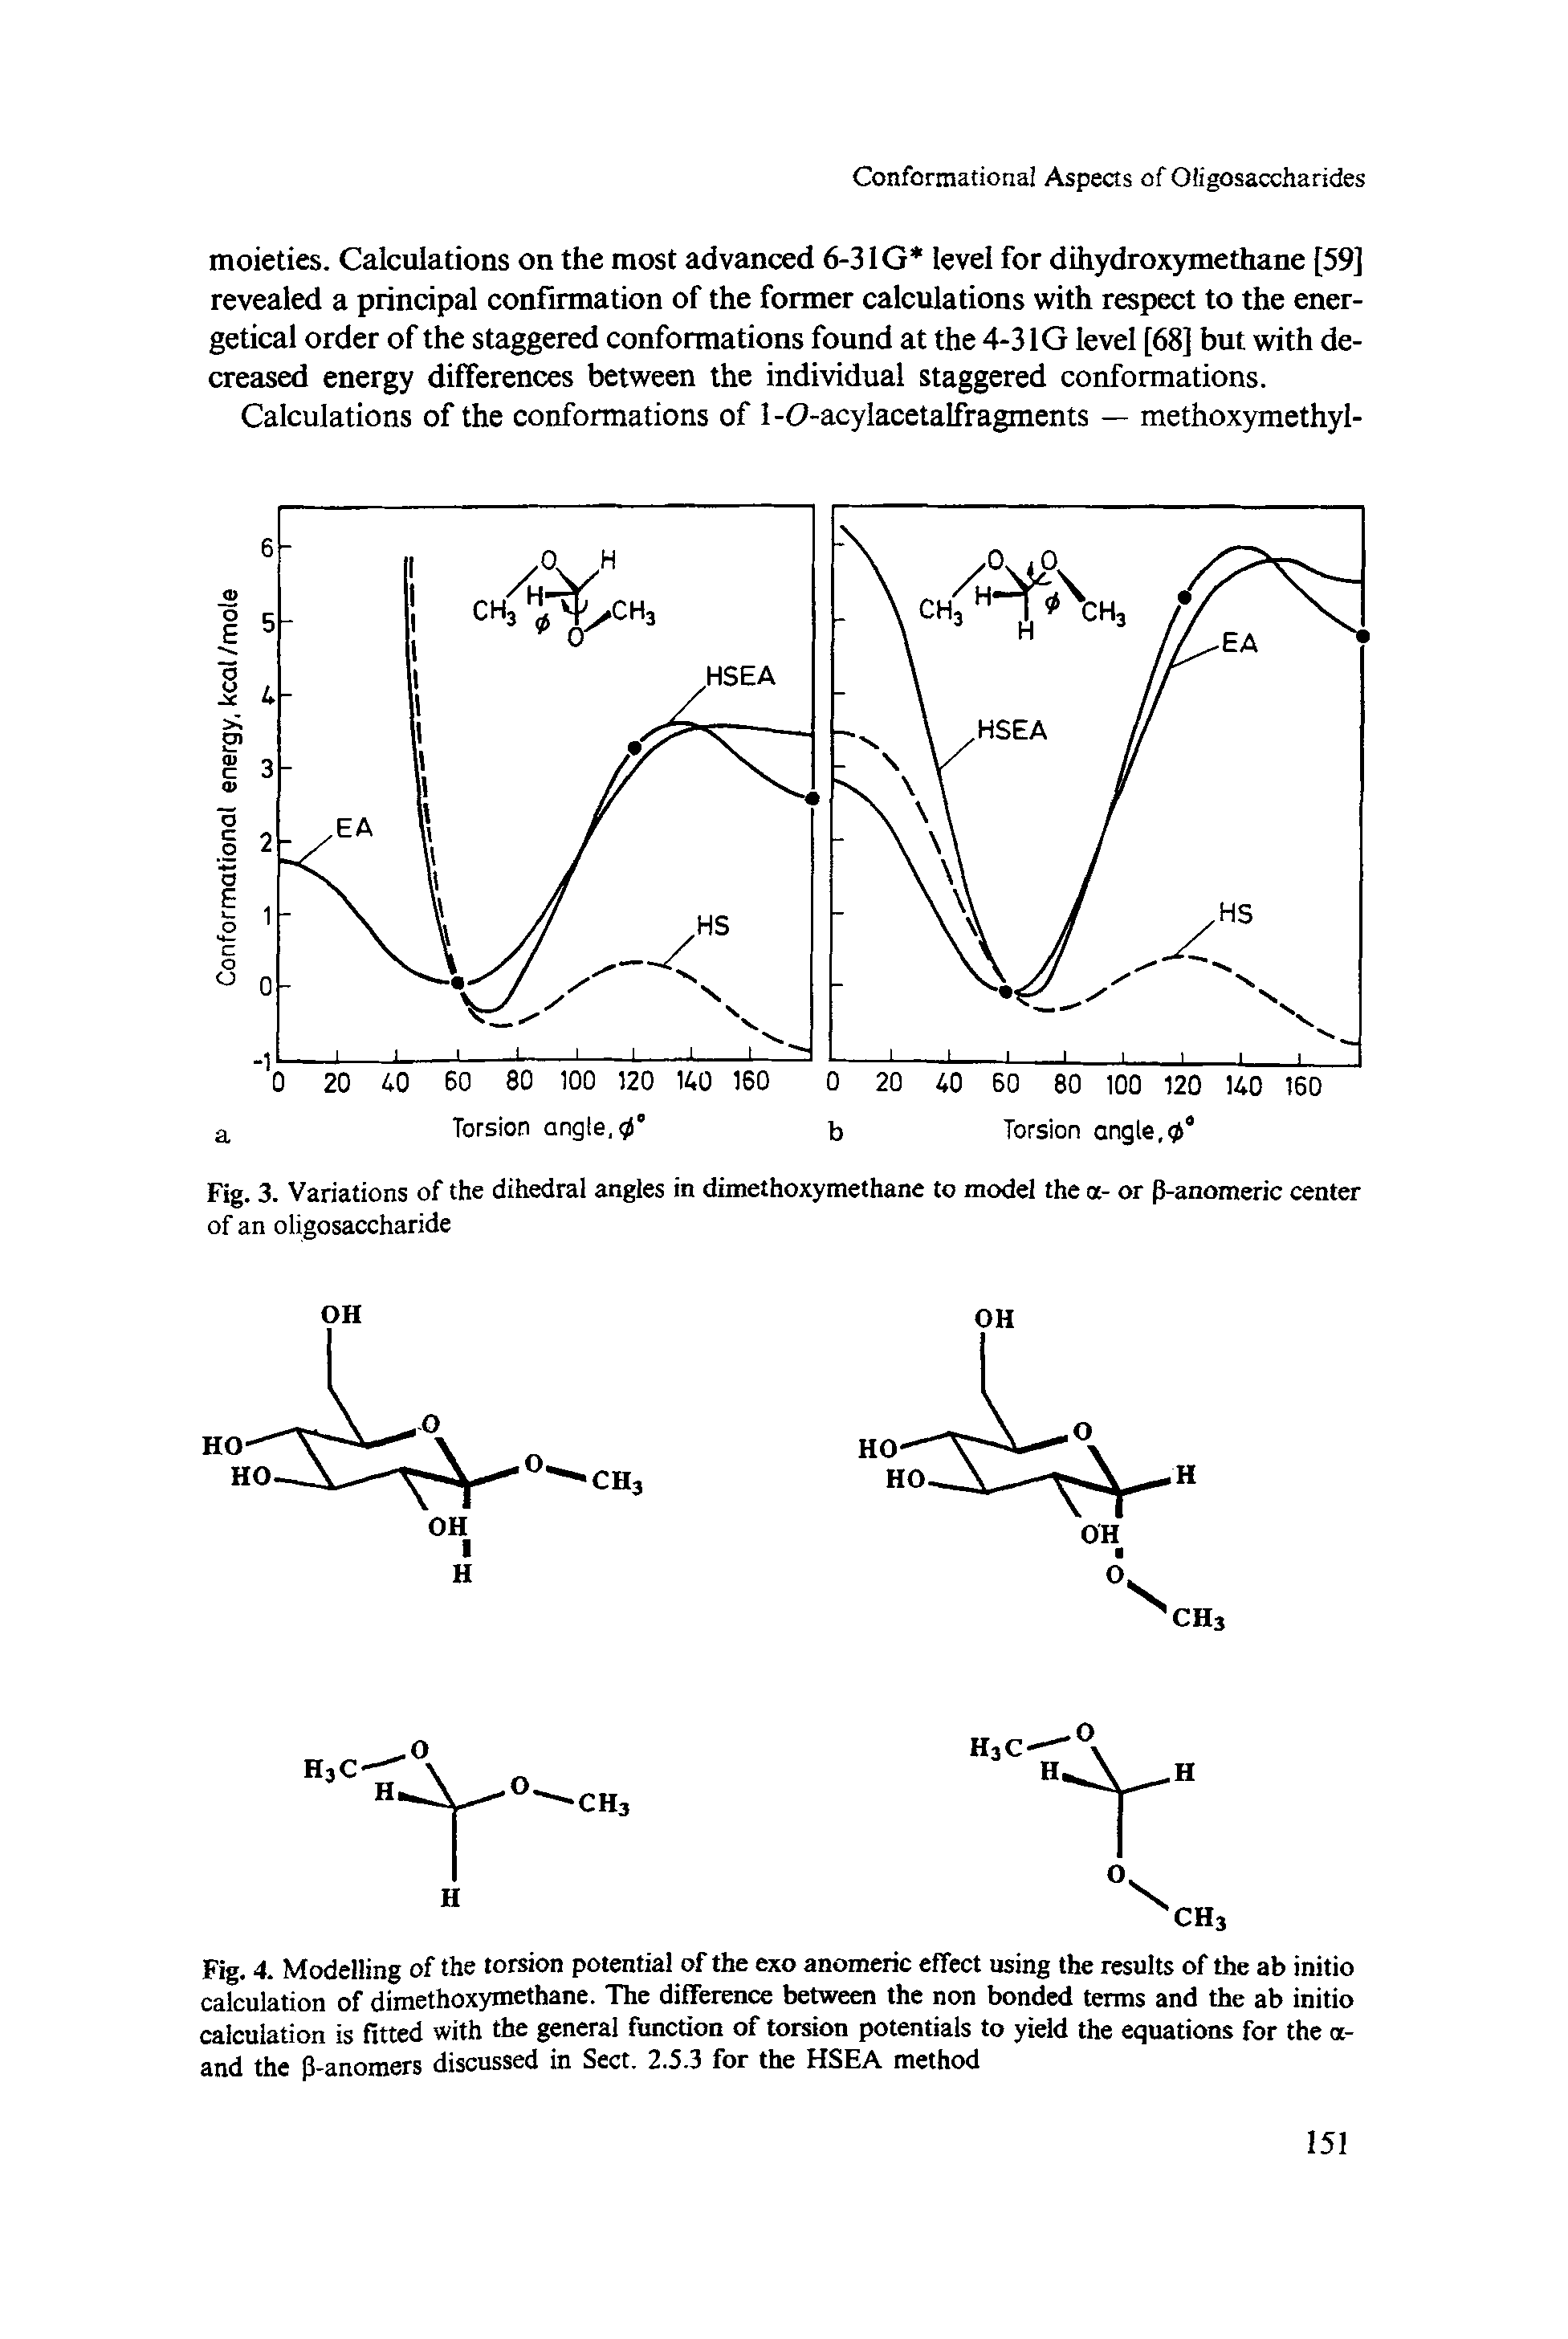 Fig. 4. Modelling of the torsion potential of the exo anomeric effect using the results of the ab initio calculation of dimethoxymethane. The difference between the non bonded terms and the ab initio calculation is fitted with the general function of torsion potentials to yield the equations for the oc-and the P-anomers discussed in Sect. 2.5.3 for the HSEA method...